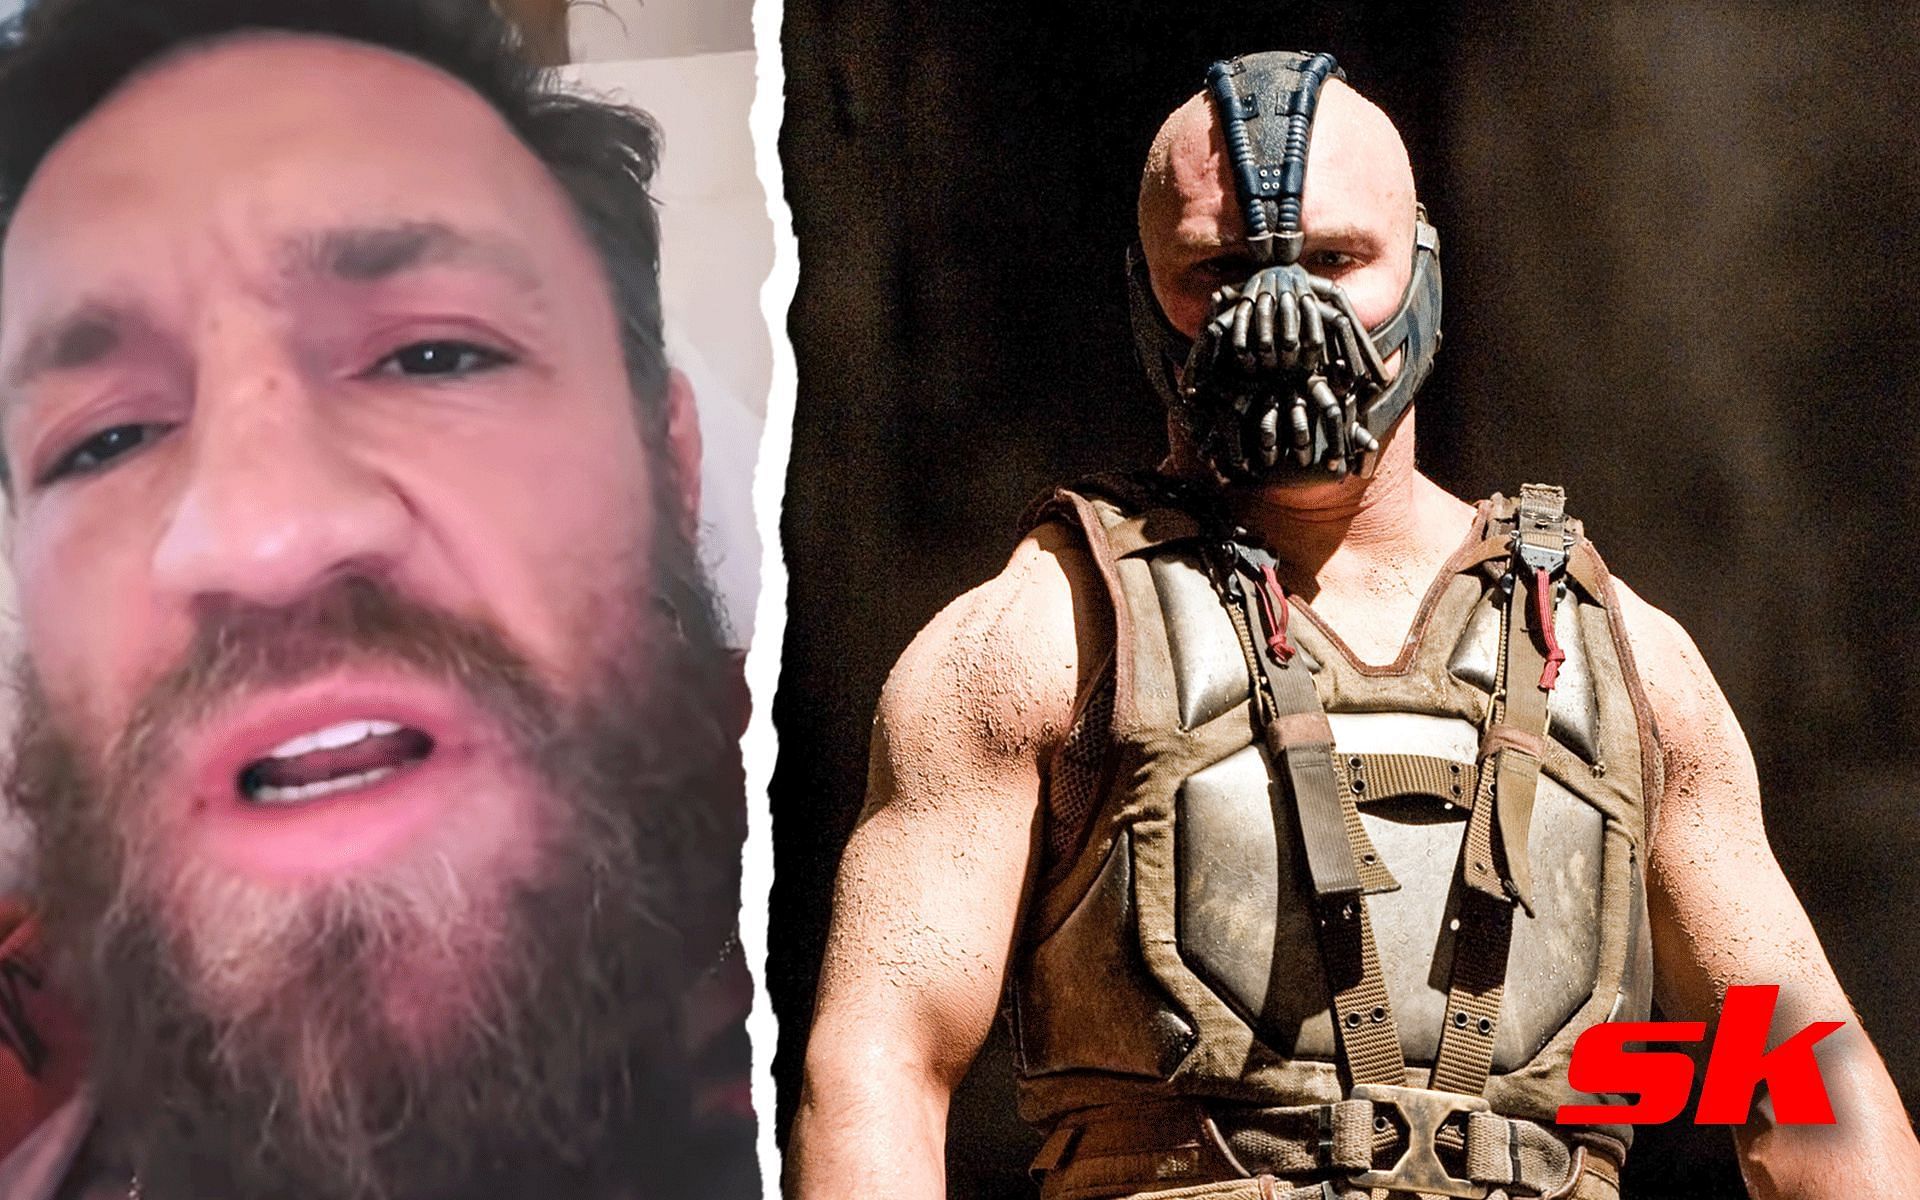 Conor McGregor (Left) and Tom Hardy as Bane (Right) [Images via @mmauncensored__ on Instagram and imbd.com |Website]